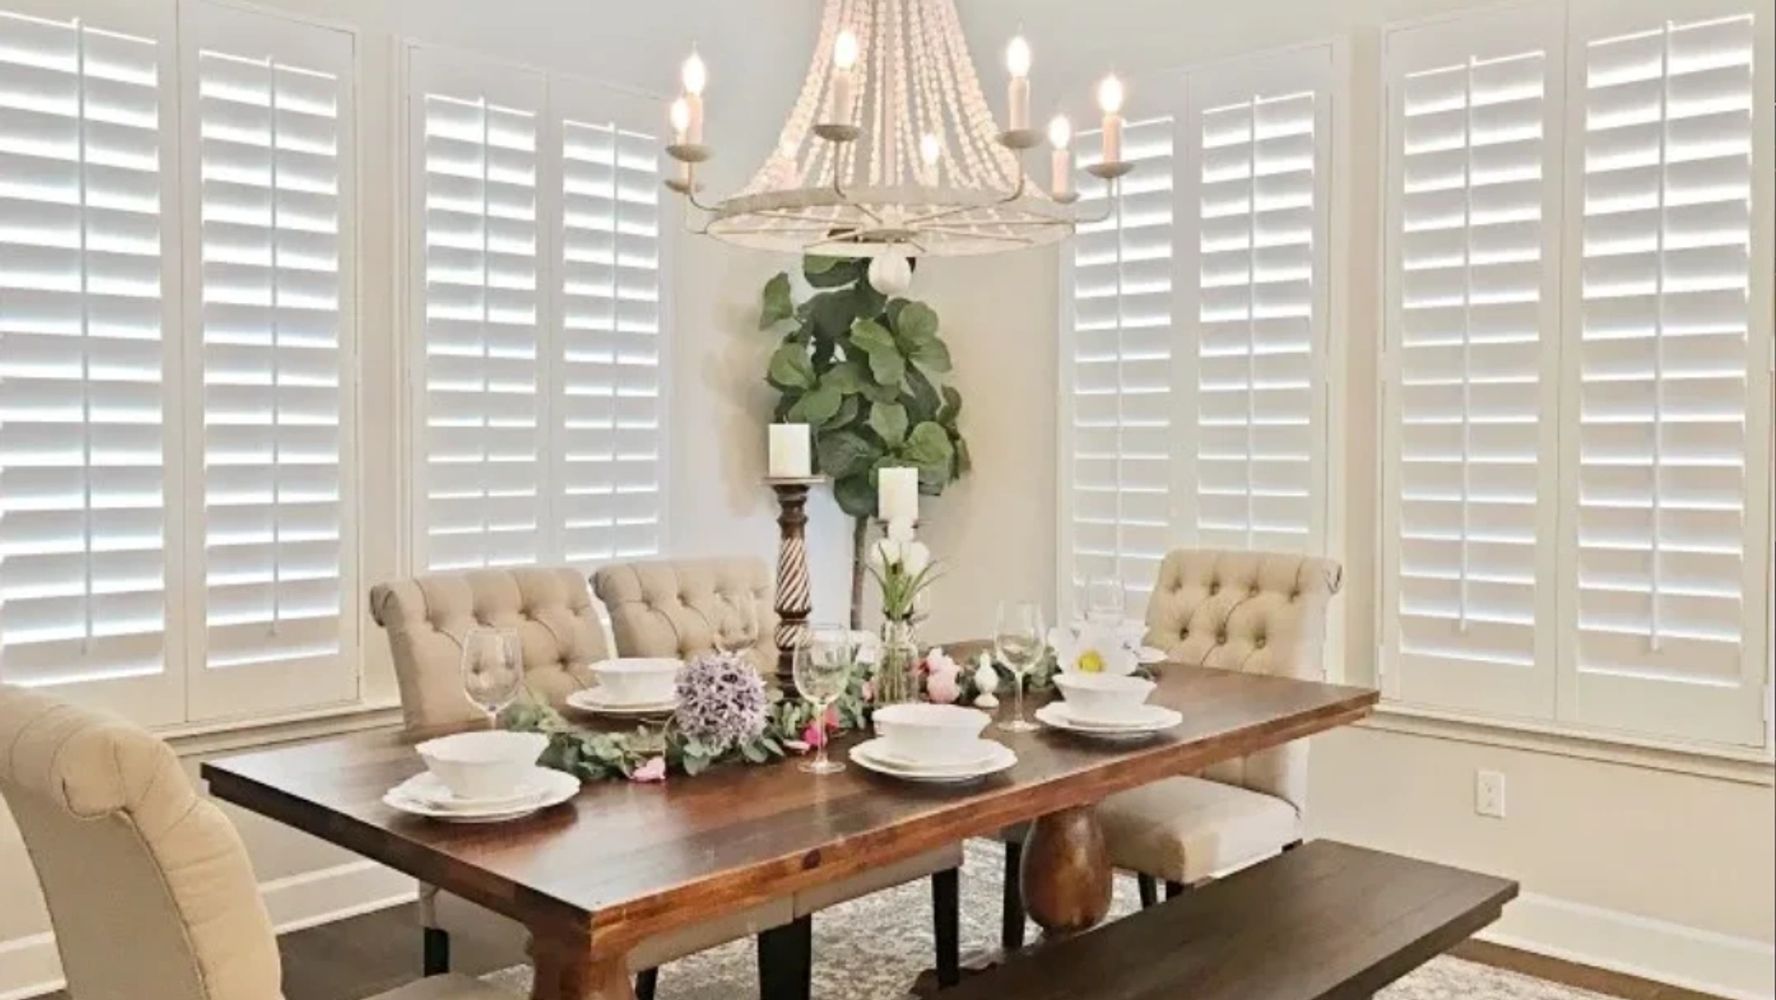 Table set with centerpiece & place settings - custom Polywood plantation shutters in the background.